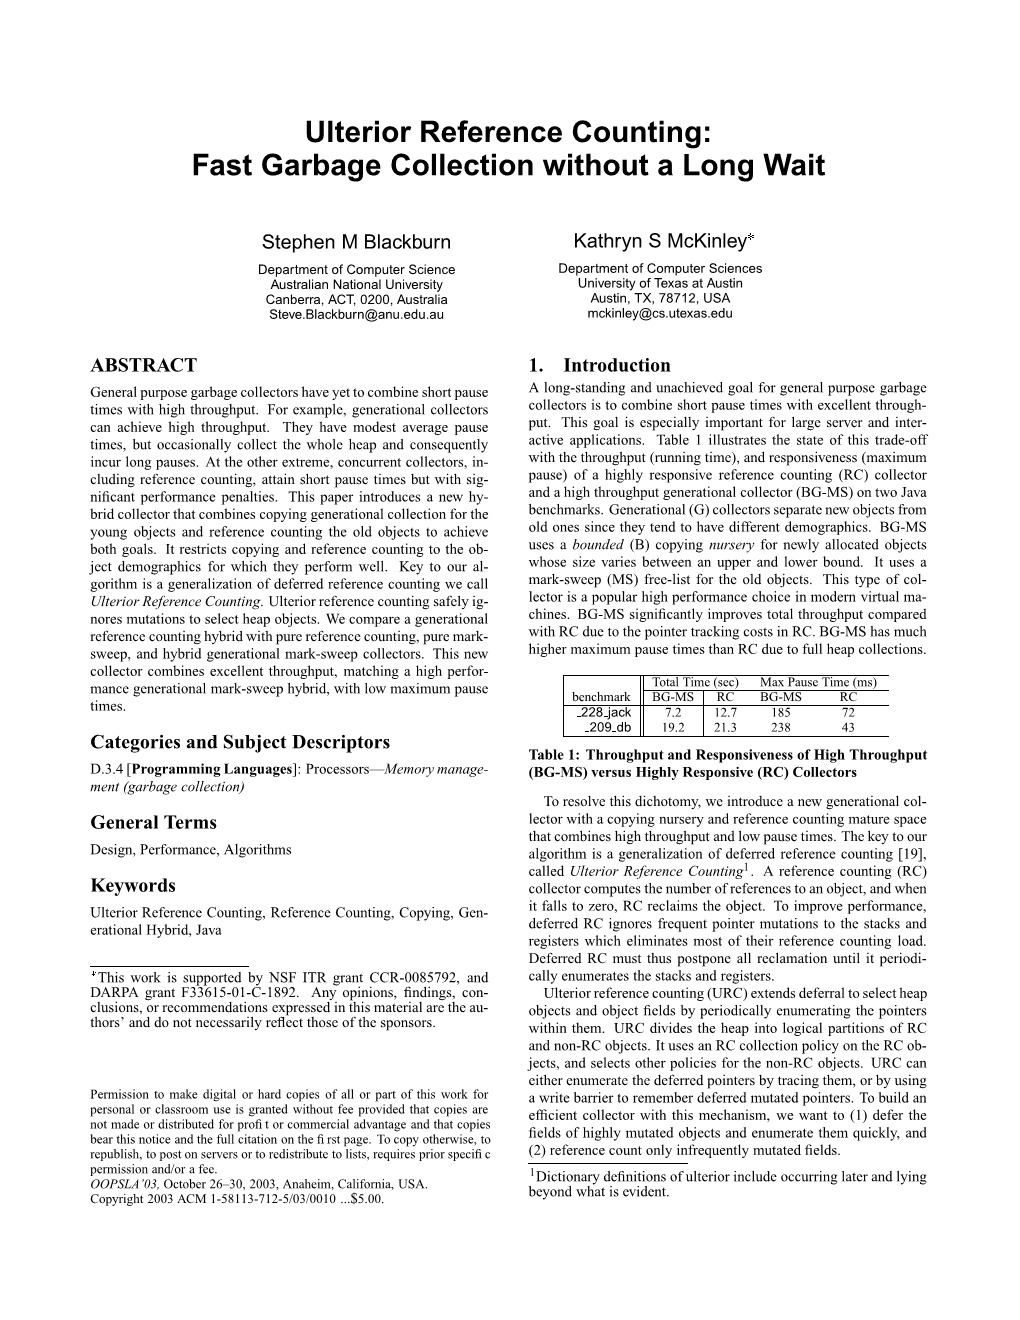 Ulterior Reference Counting: Fast Garbage Collection Without a Long Wait